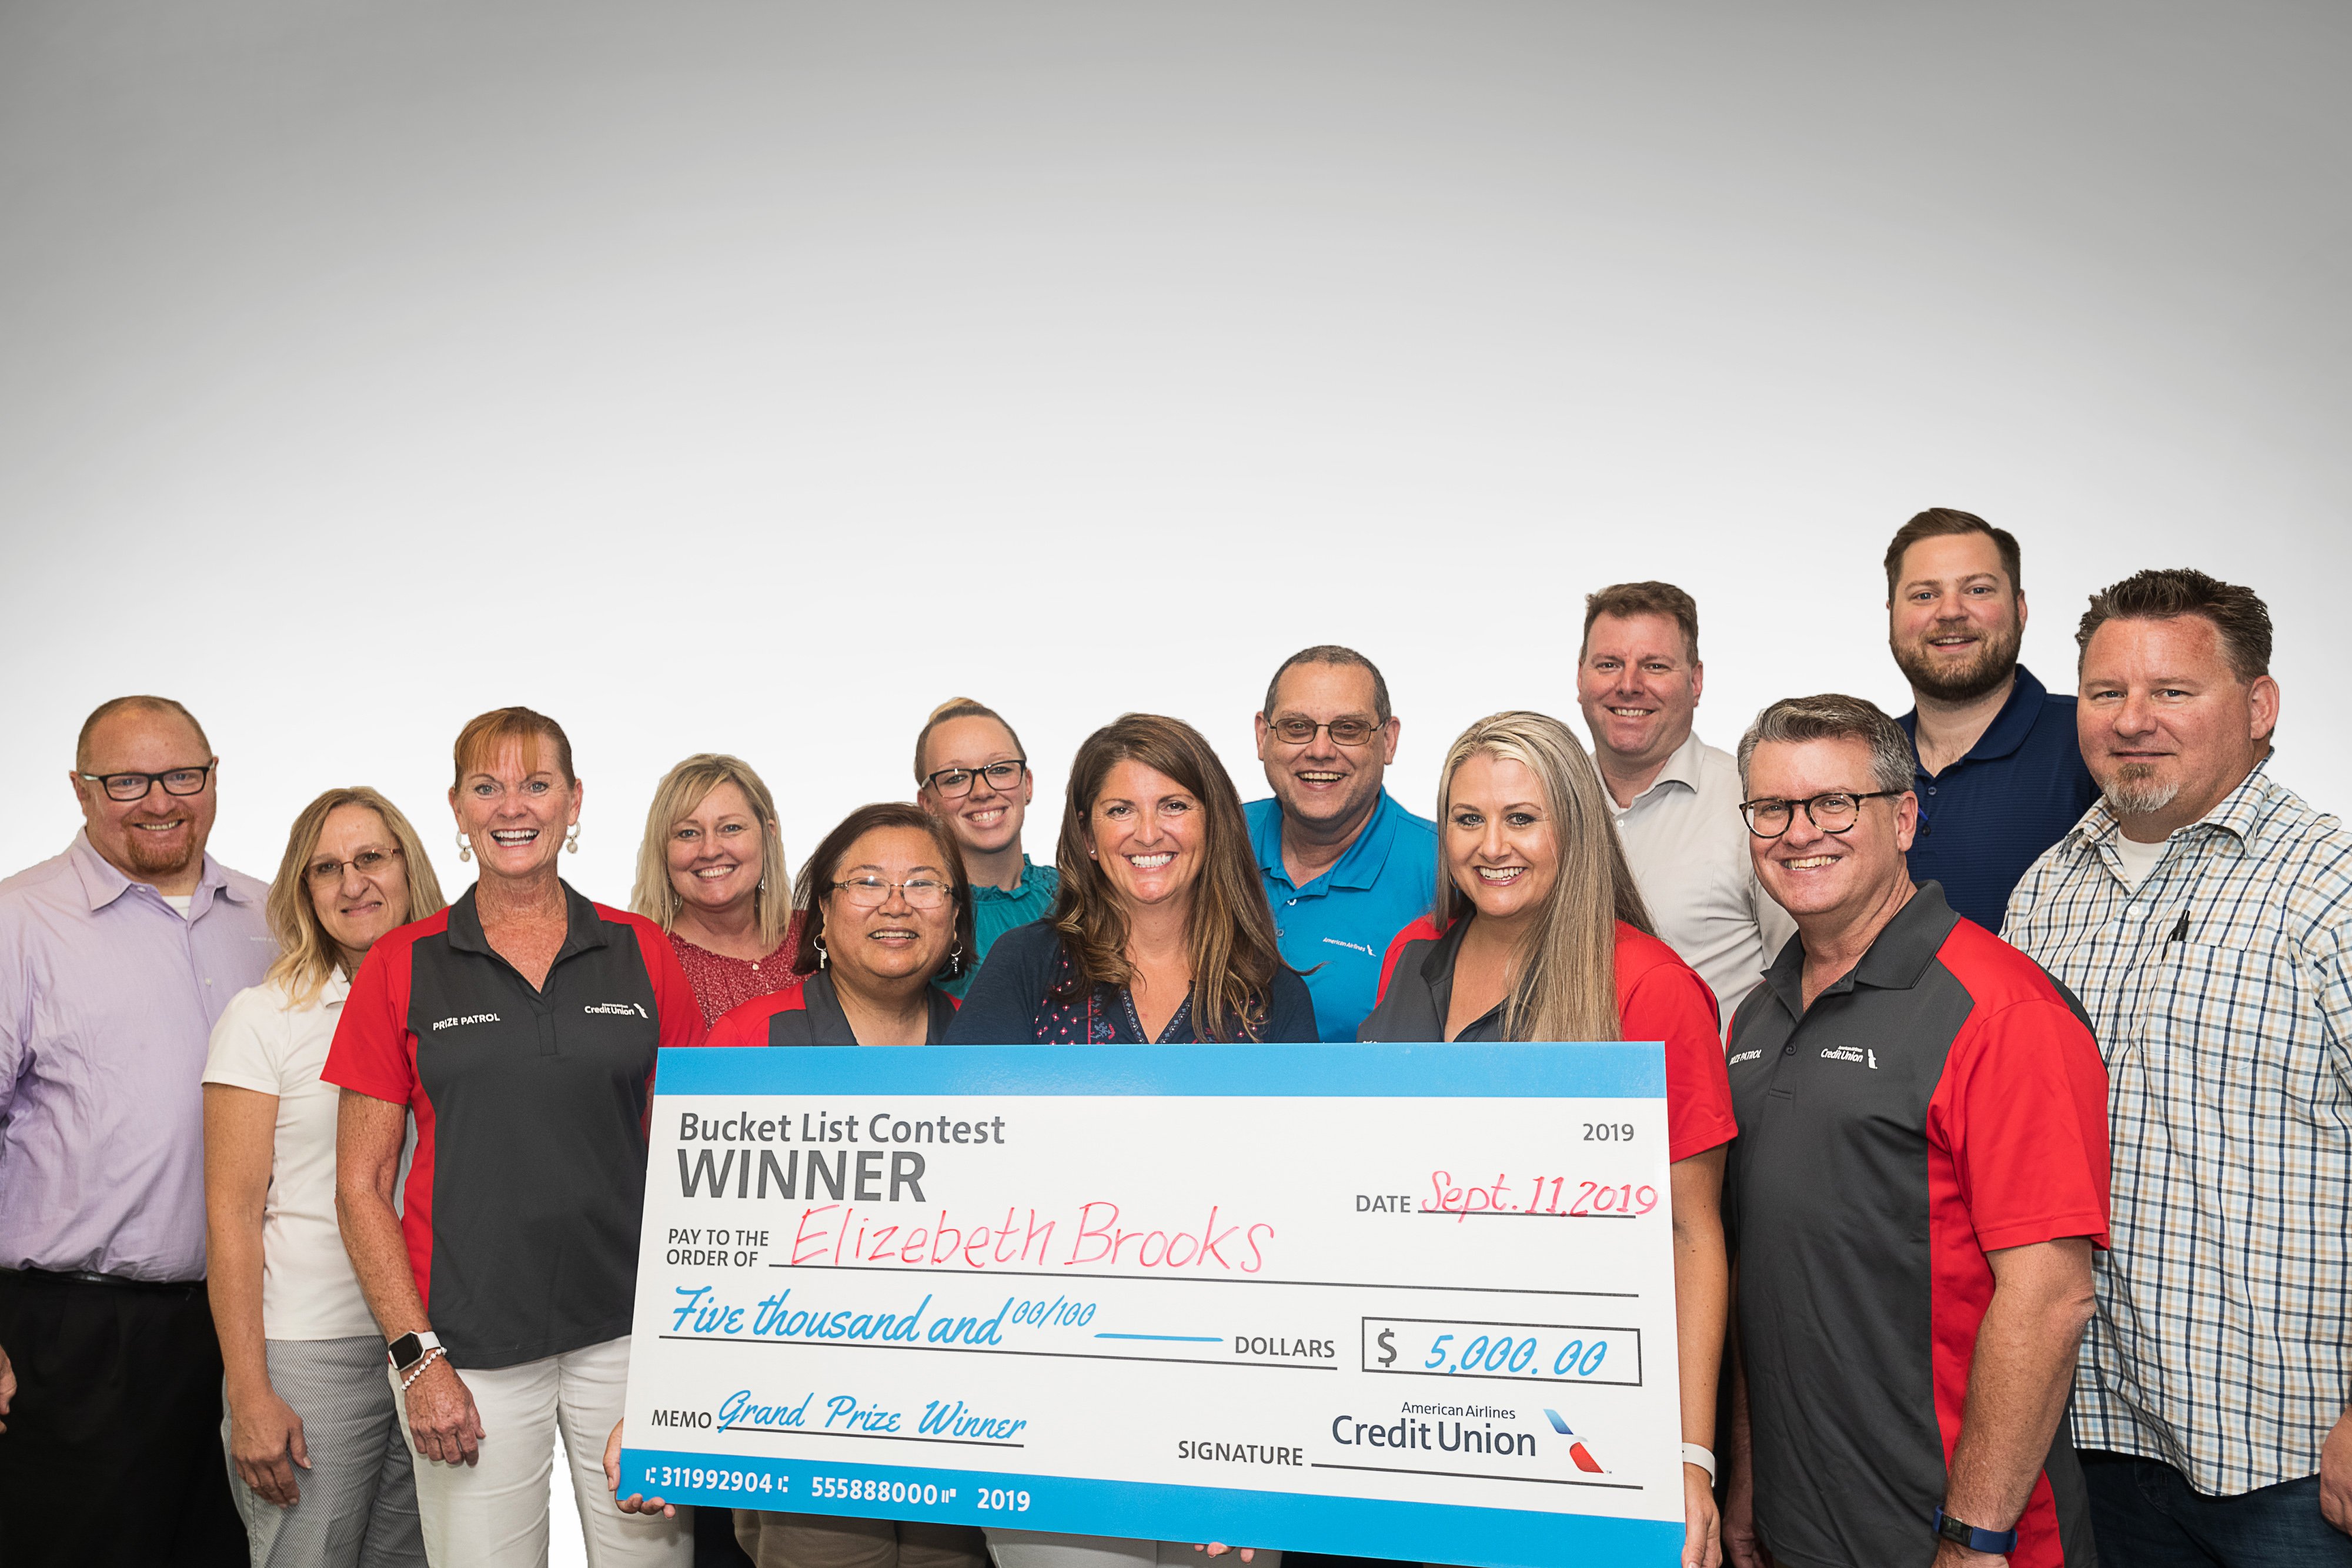 american airlines federal credit union employees holding big check with winner